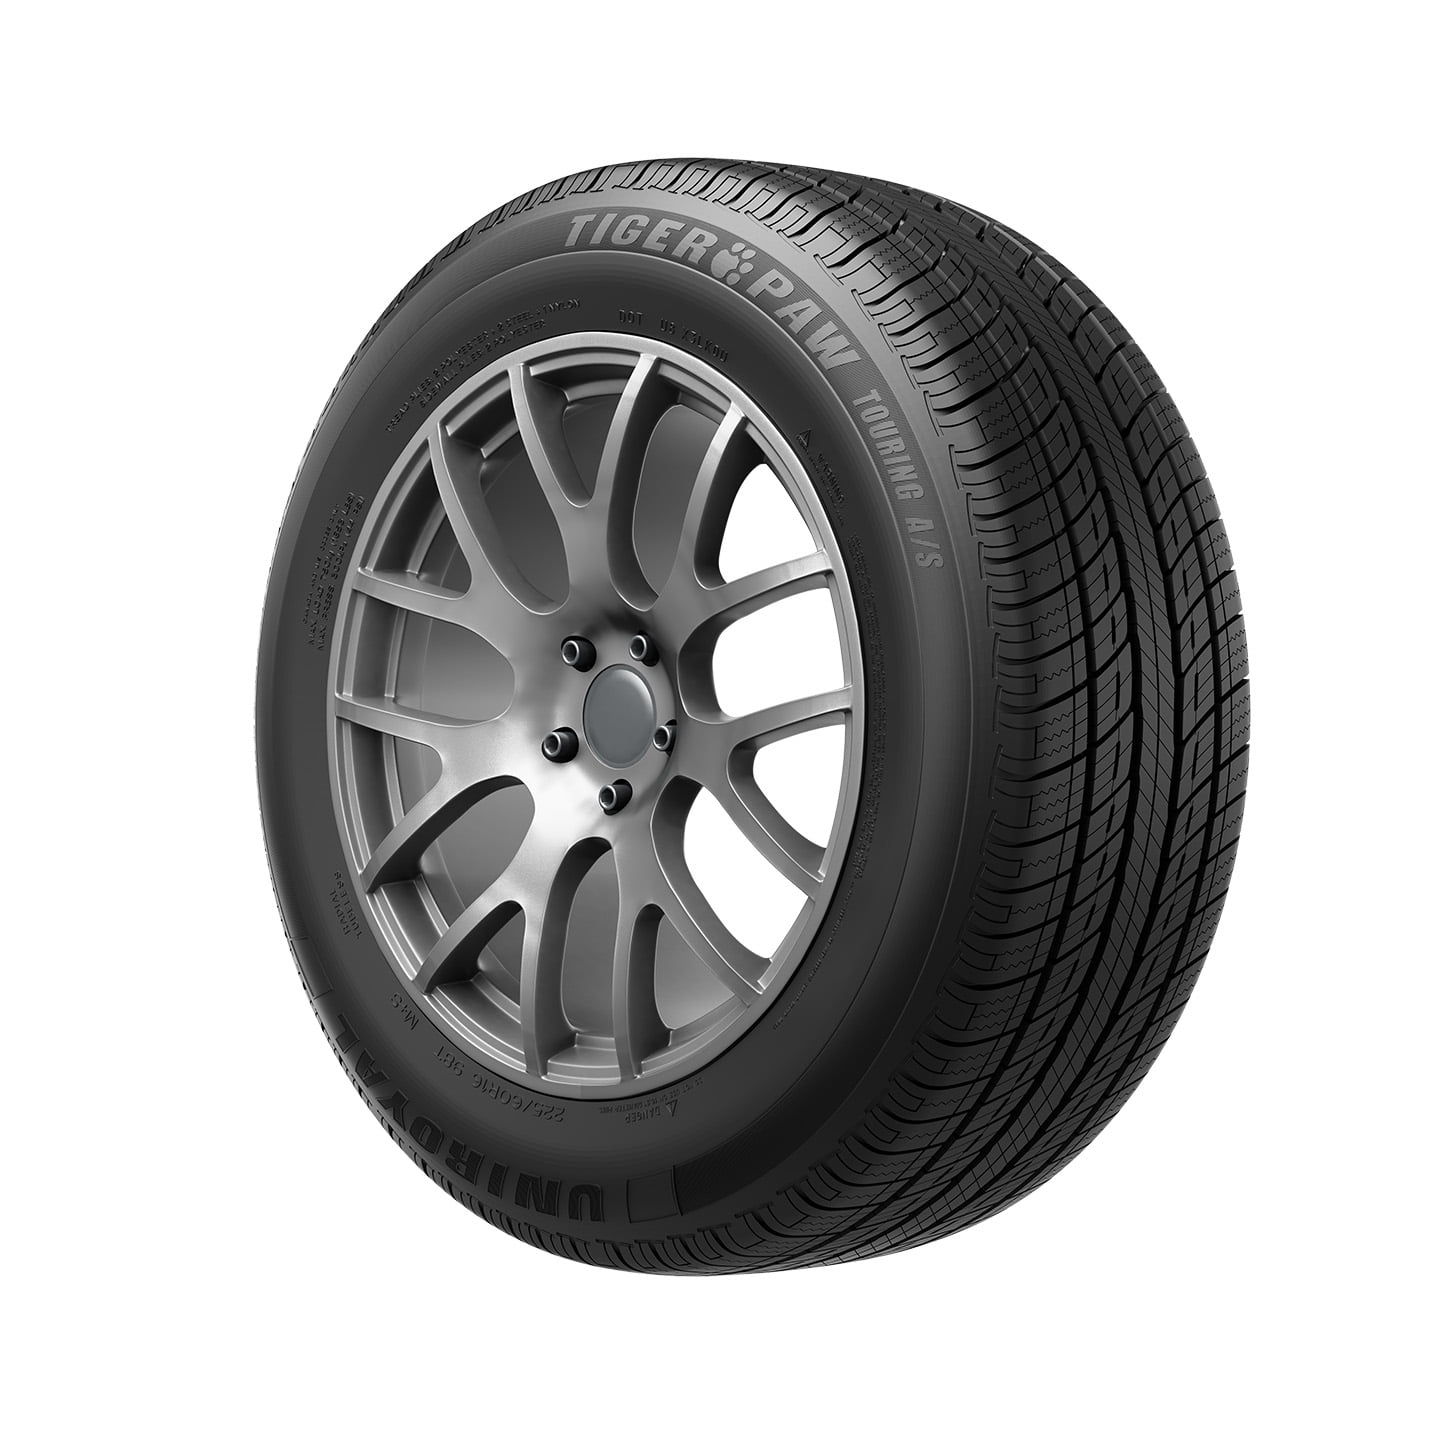 Uniroyal Tiger Paw Touring A/S All-Season Radial Car Tire for Passenger Cars and SUVs Crossovers 255/40R19/XL 100V 